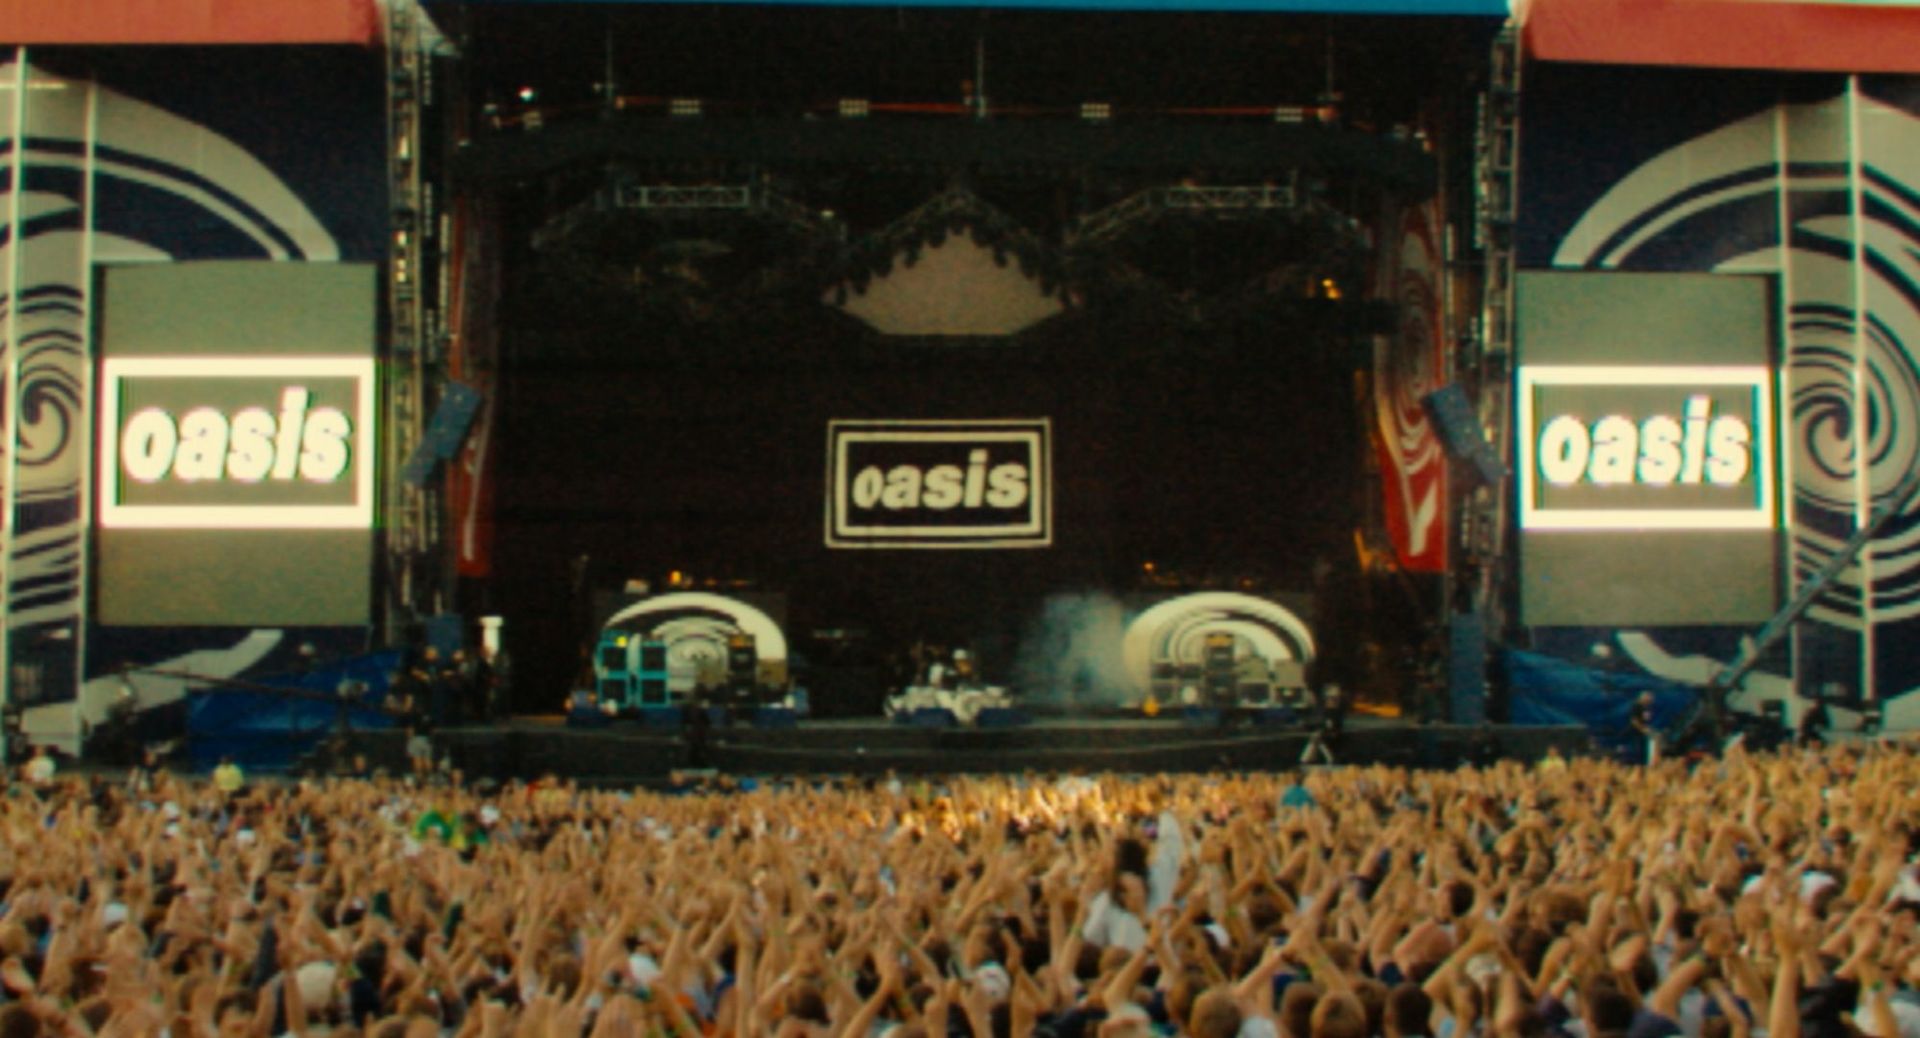 oasis-37-crowd-at-knebworth-copyright-ignition